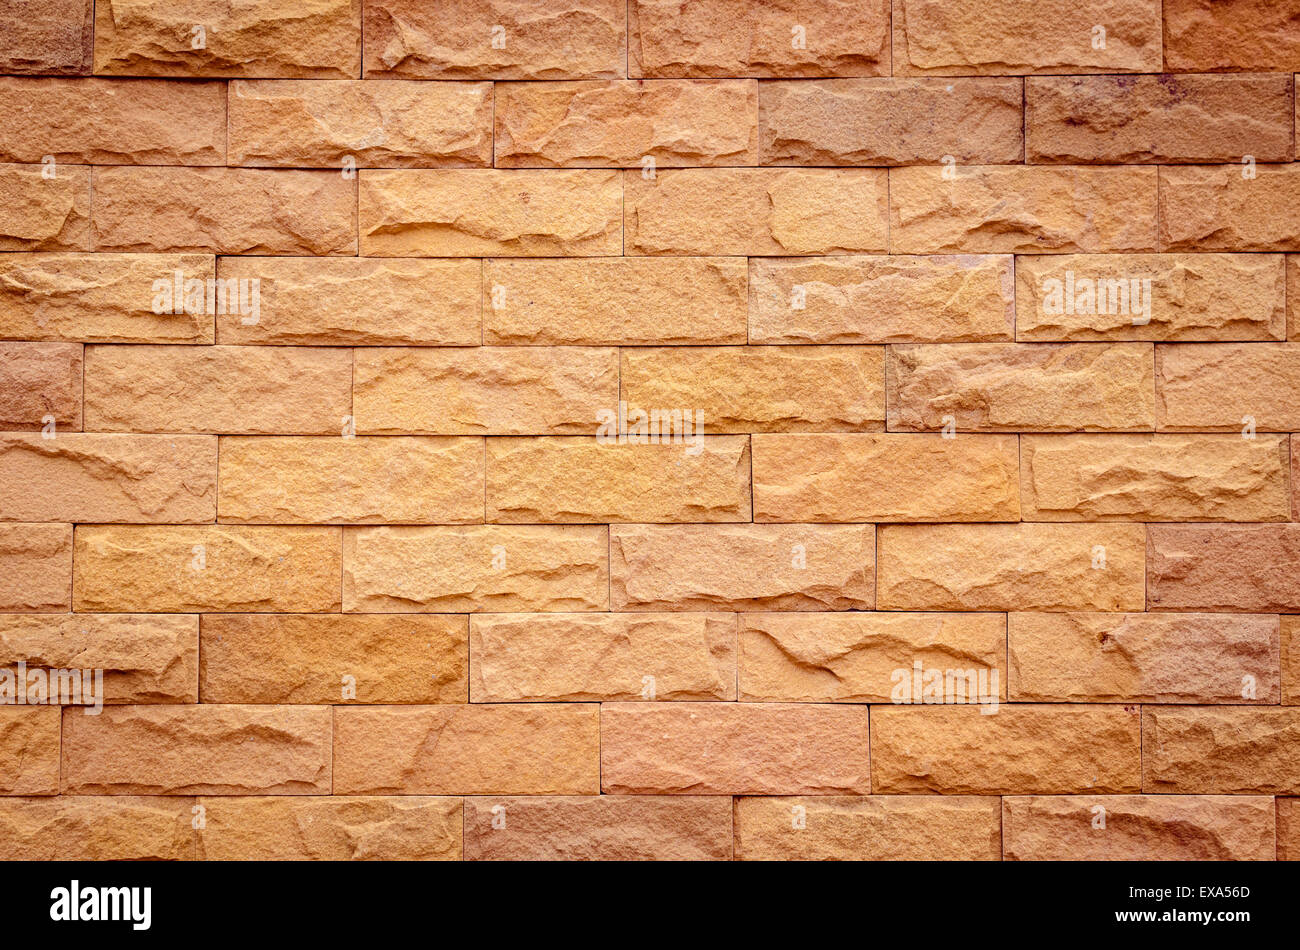 A brick wall in different natural orange tones Stock Photo